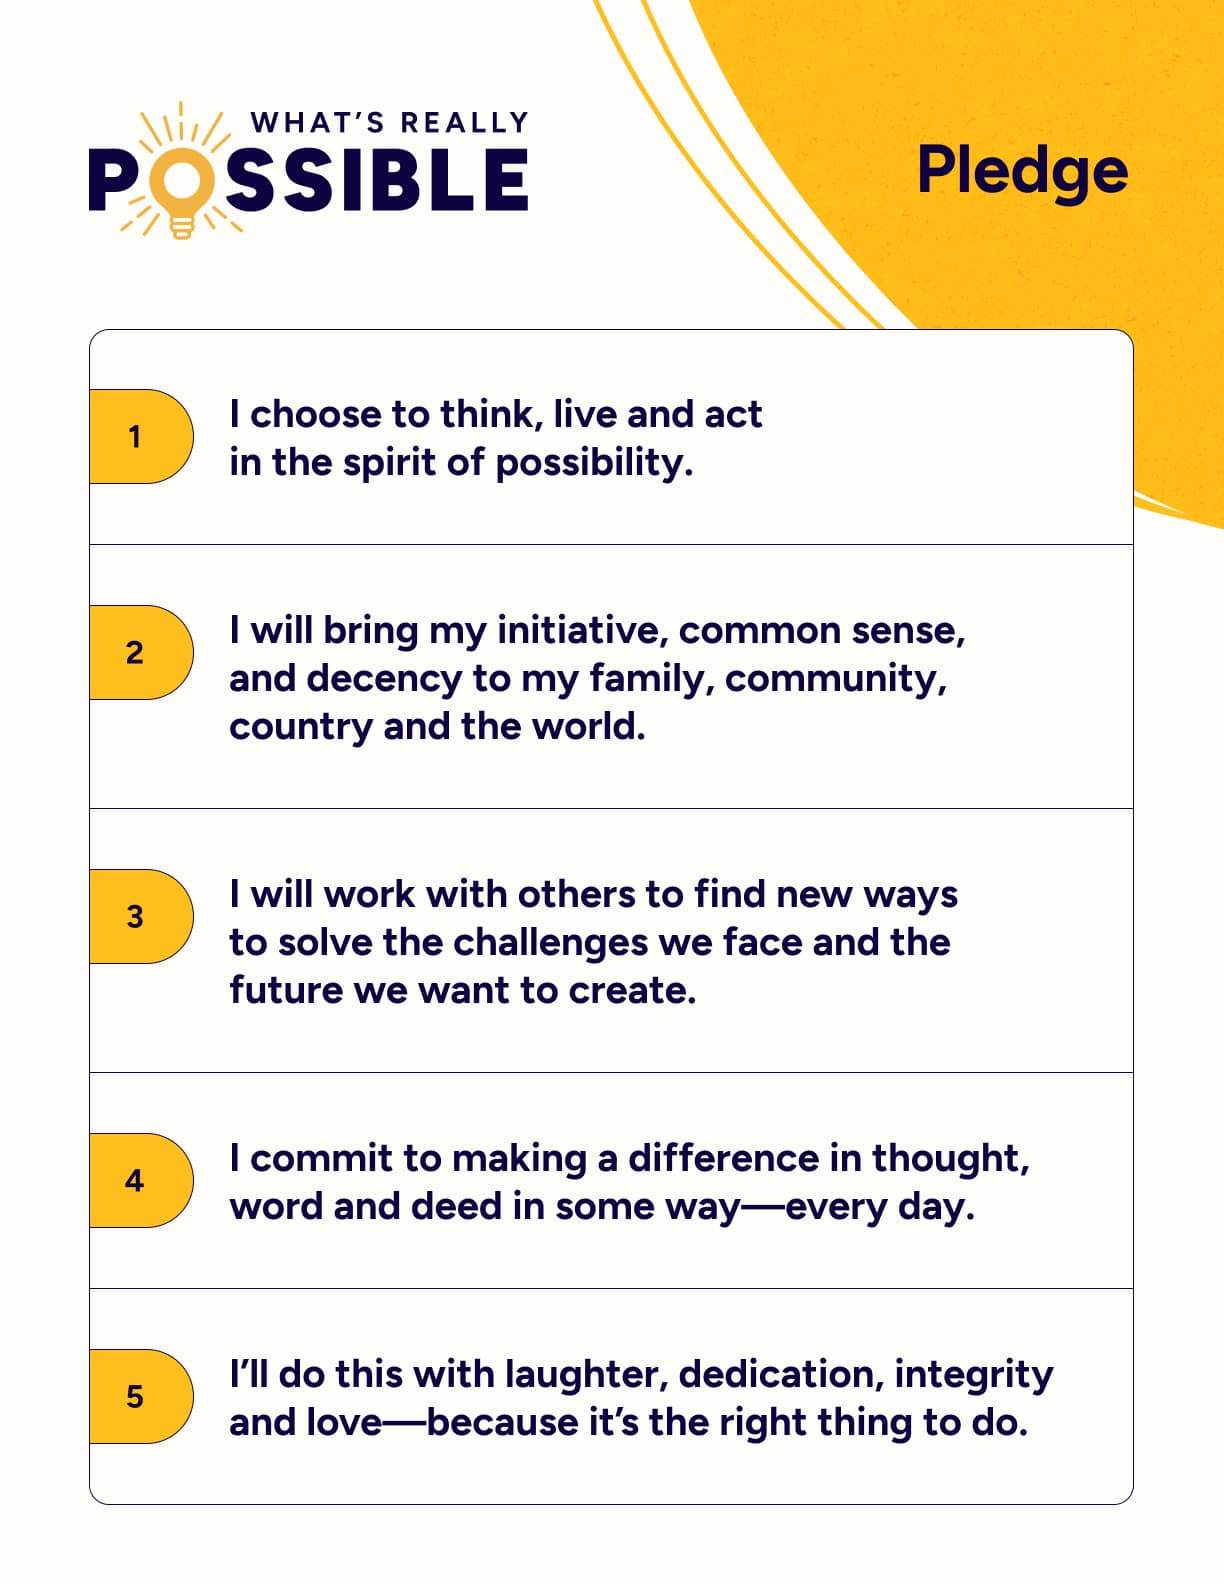 whats-really-possible-pledge